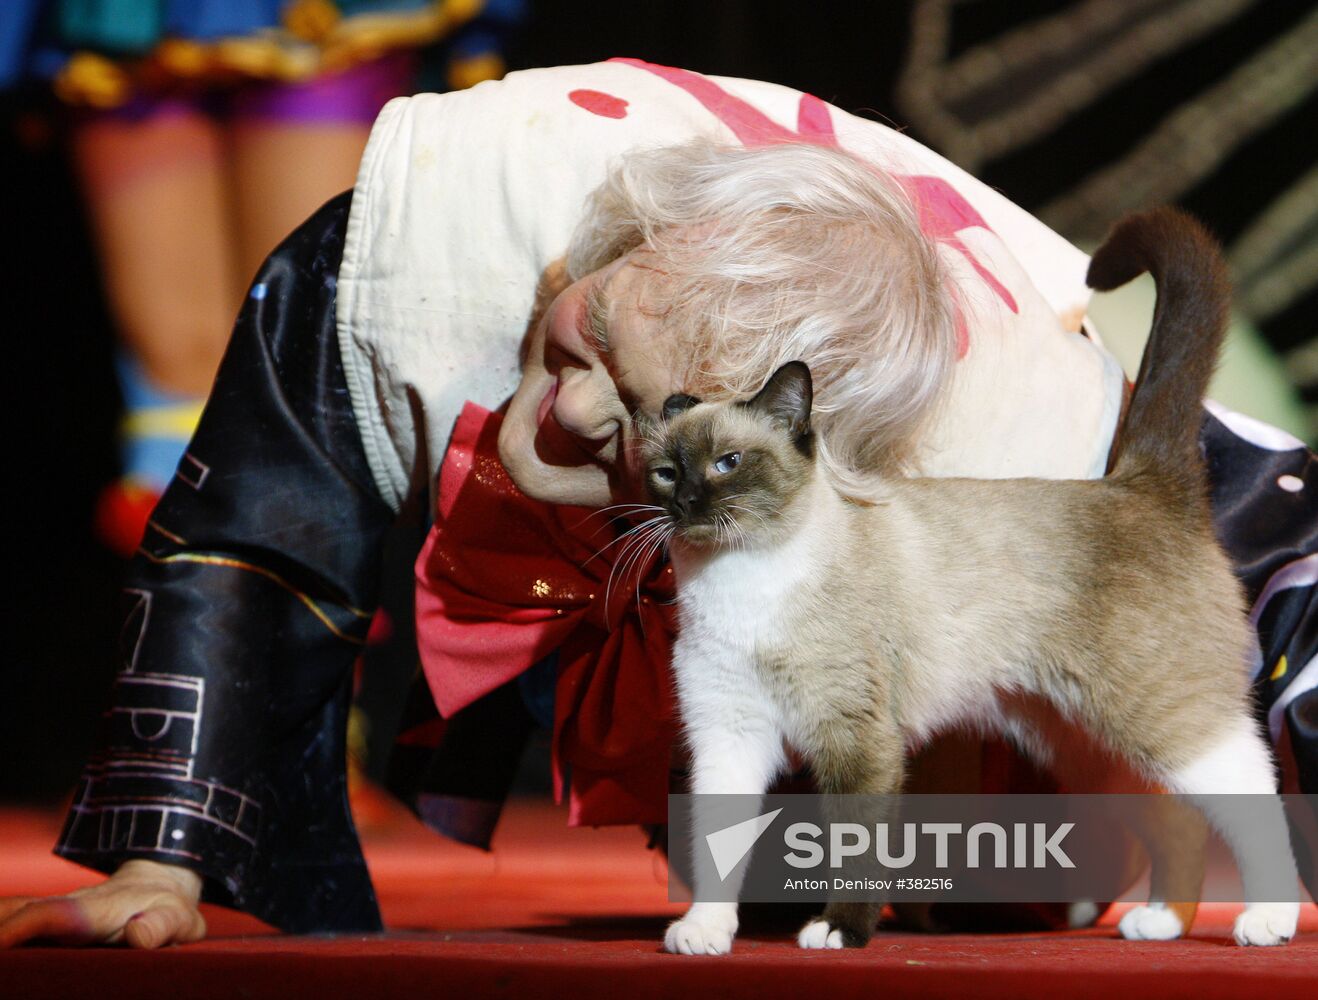 Yuri Kuklachev's performance "Queen of the Cats"